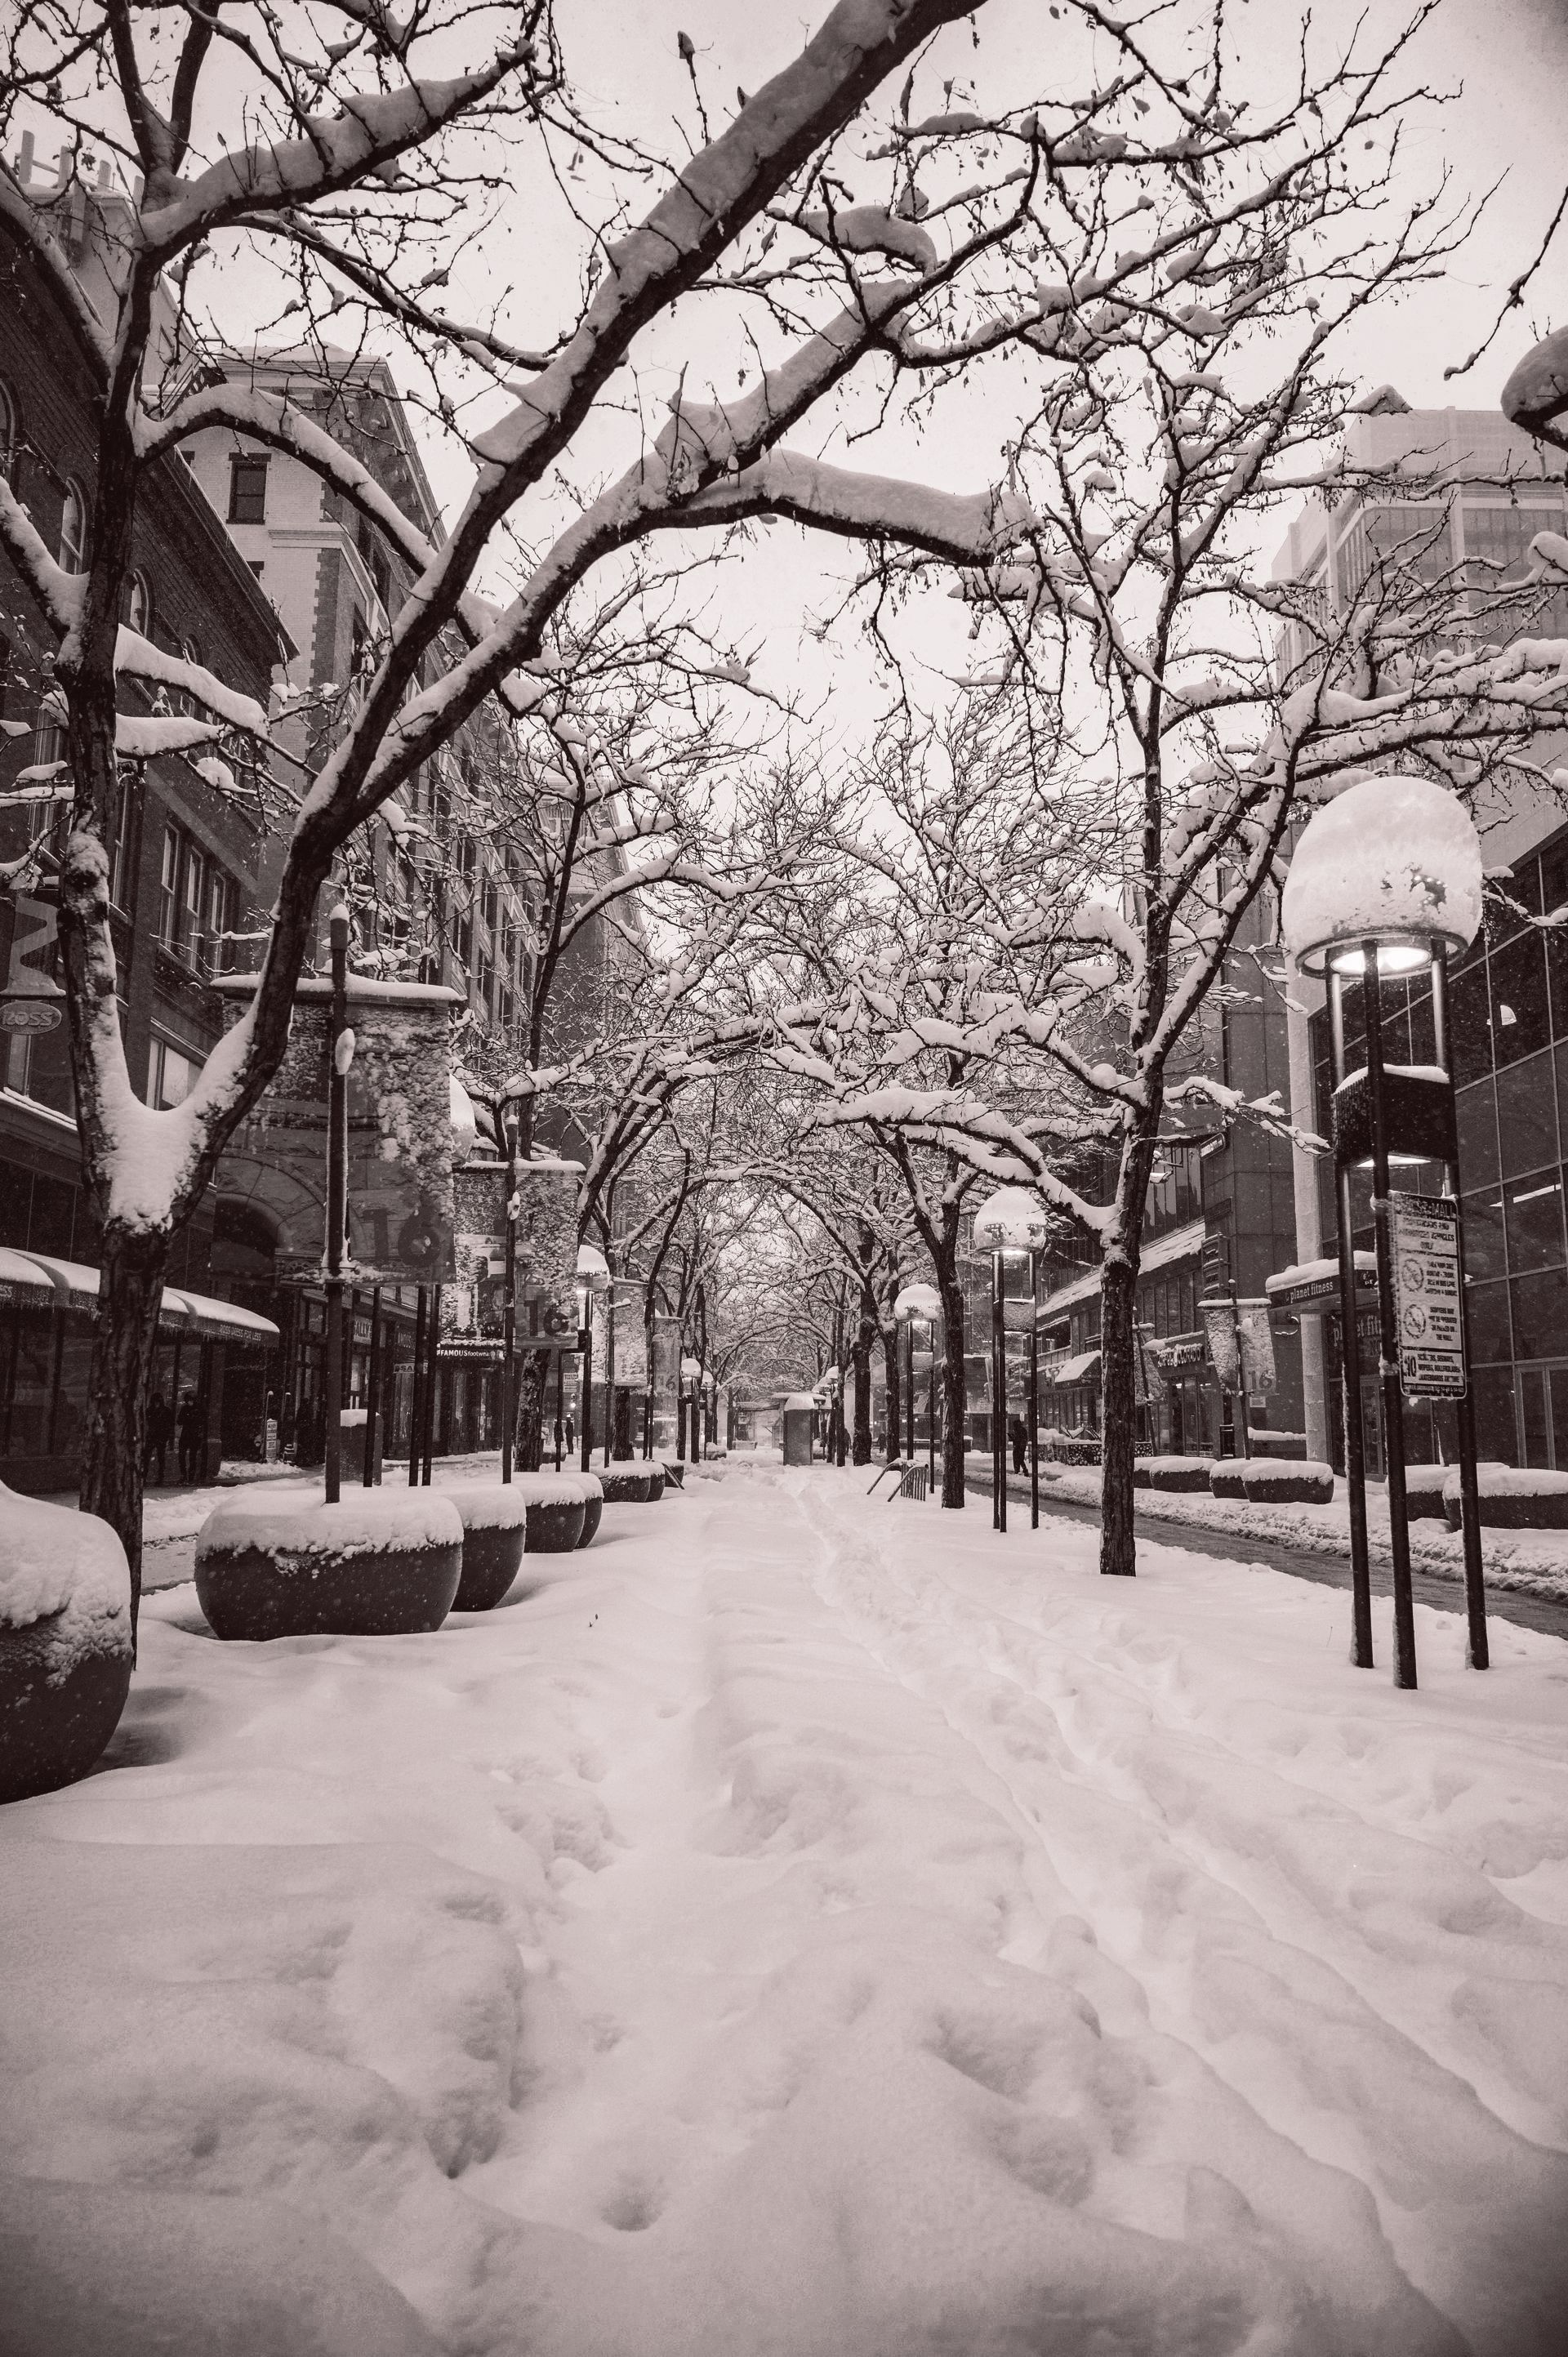 A black and white photo of a snowy street with trees covered in snow